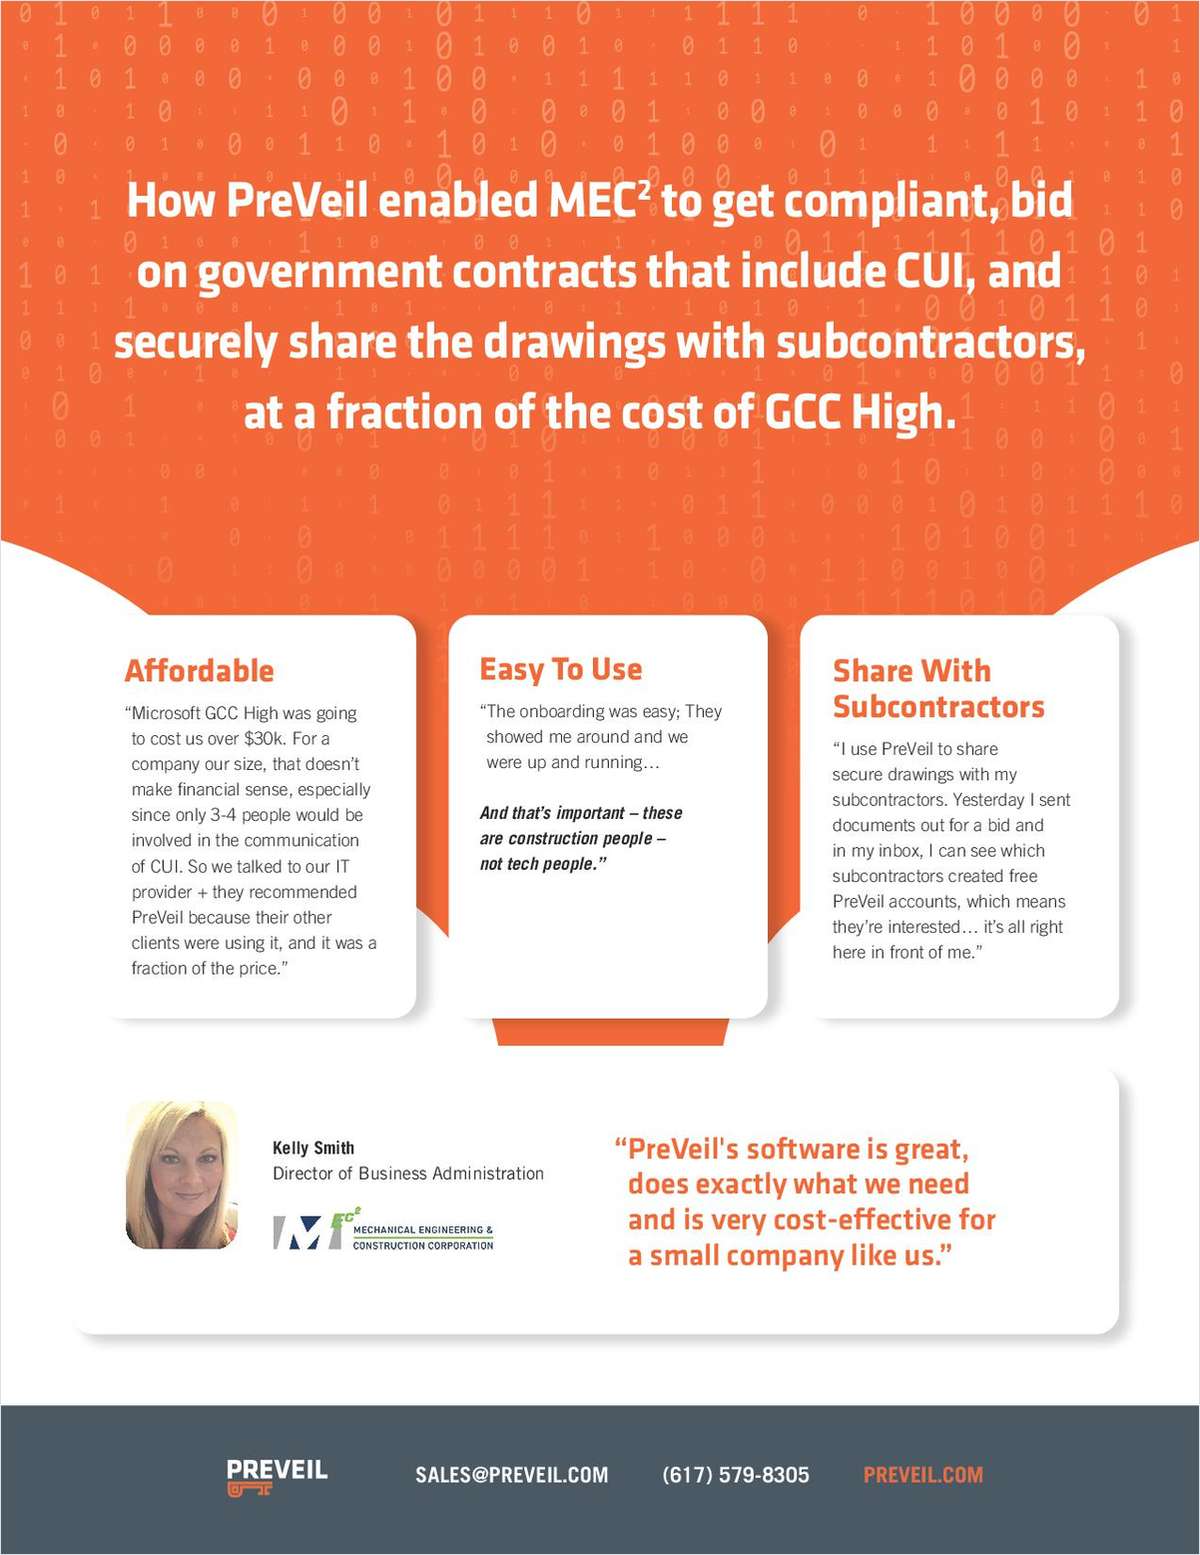 How PreVeil enabled MEC2 to get compliant, bid on government contracts that include CUI, and securely share the drawings with subcontractors,at a fraction of the cost of GCC High.